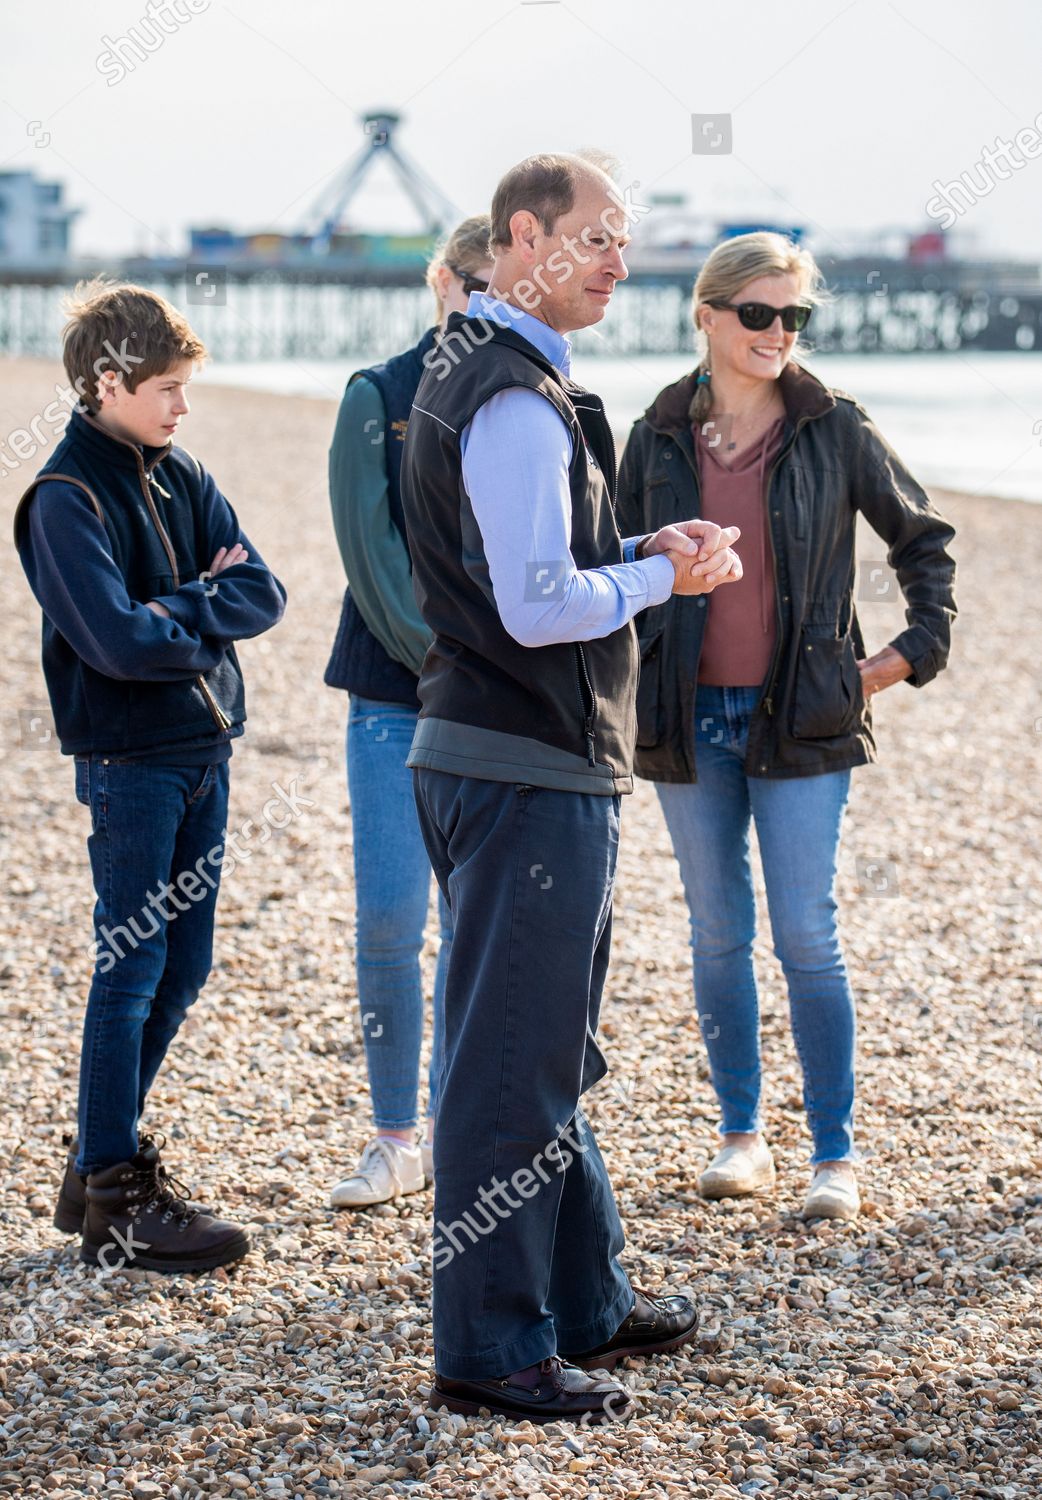 prince-edward-and-sophie-countess-of-wessex-great-british-beach-clean-southsea-beach-portsmouth-uk-shutterstock-editorial-10782998du.jpg